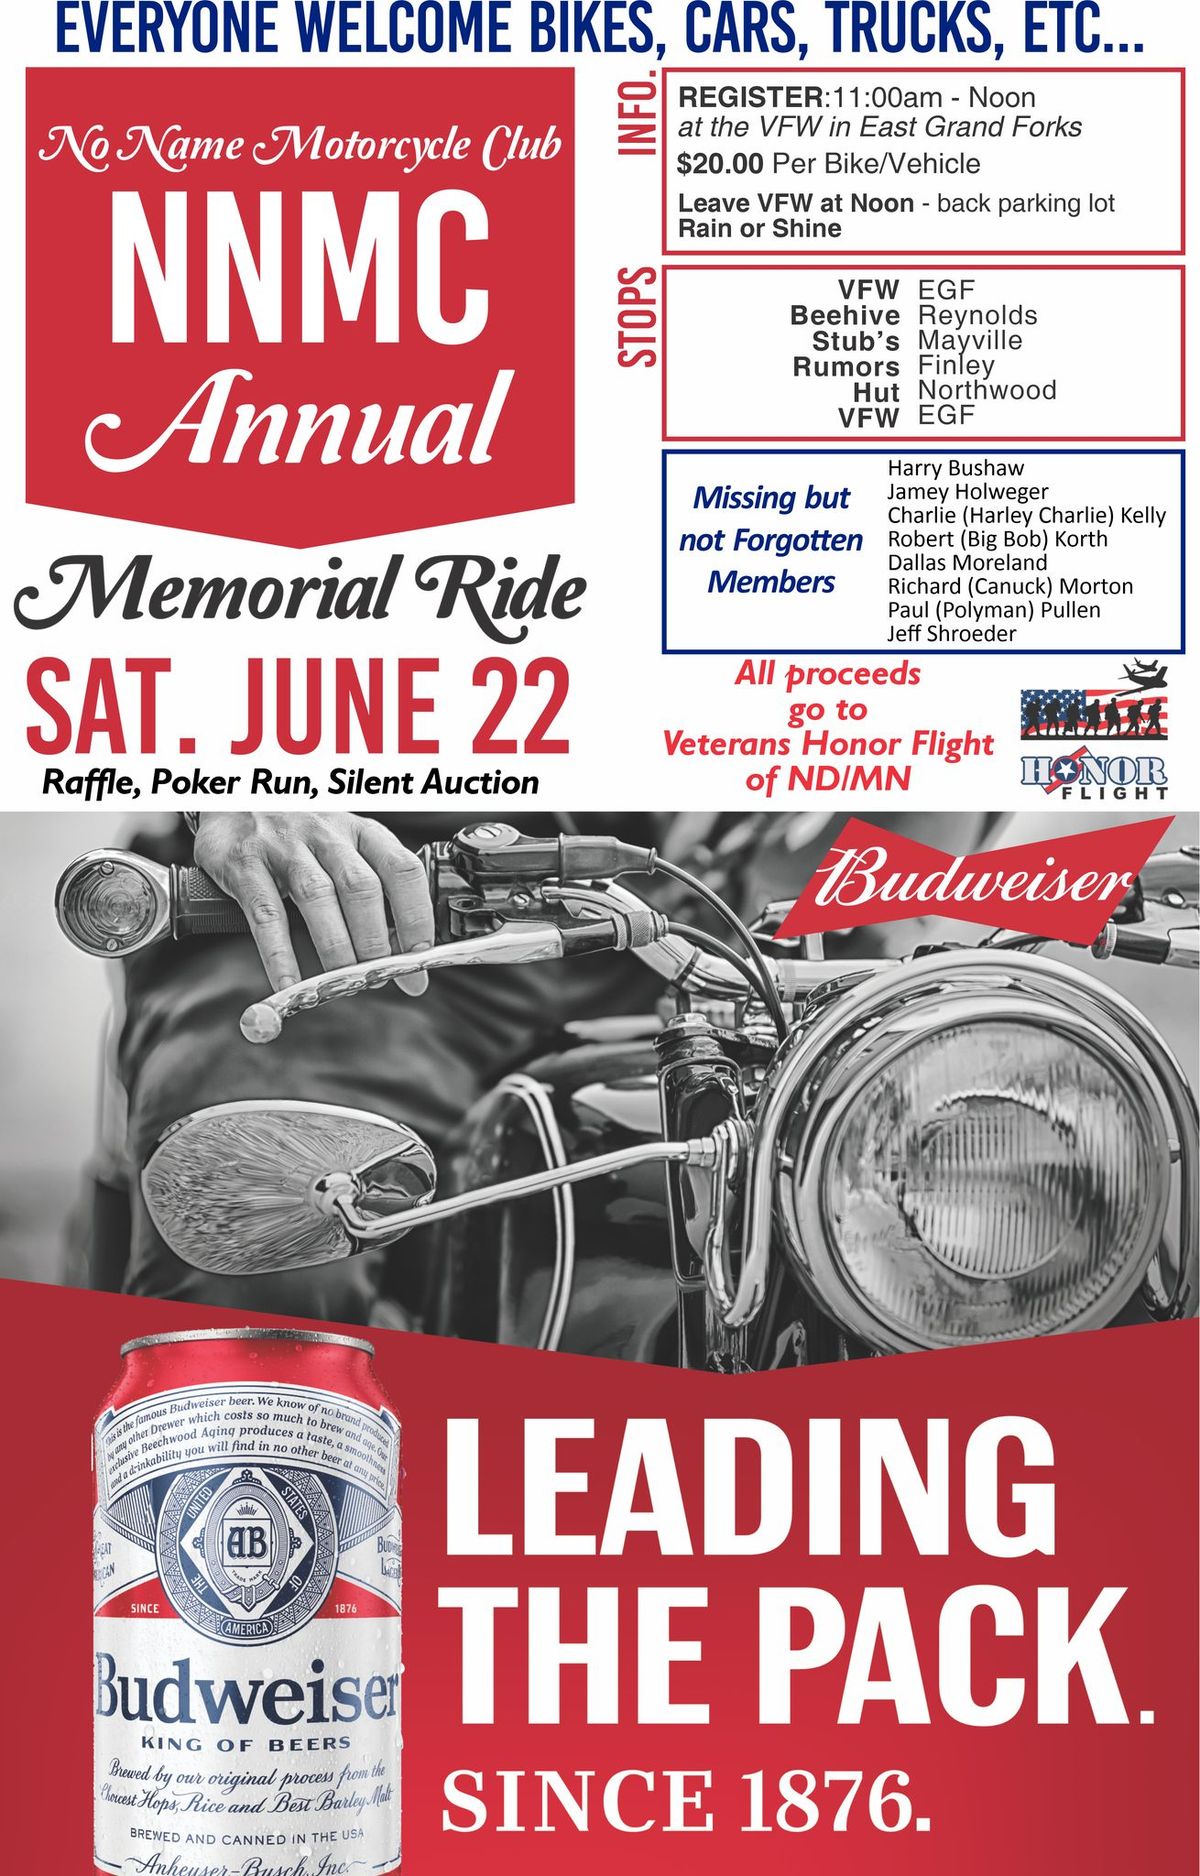 No Name Motorcycle Club Annual Ride in